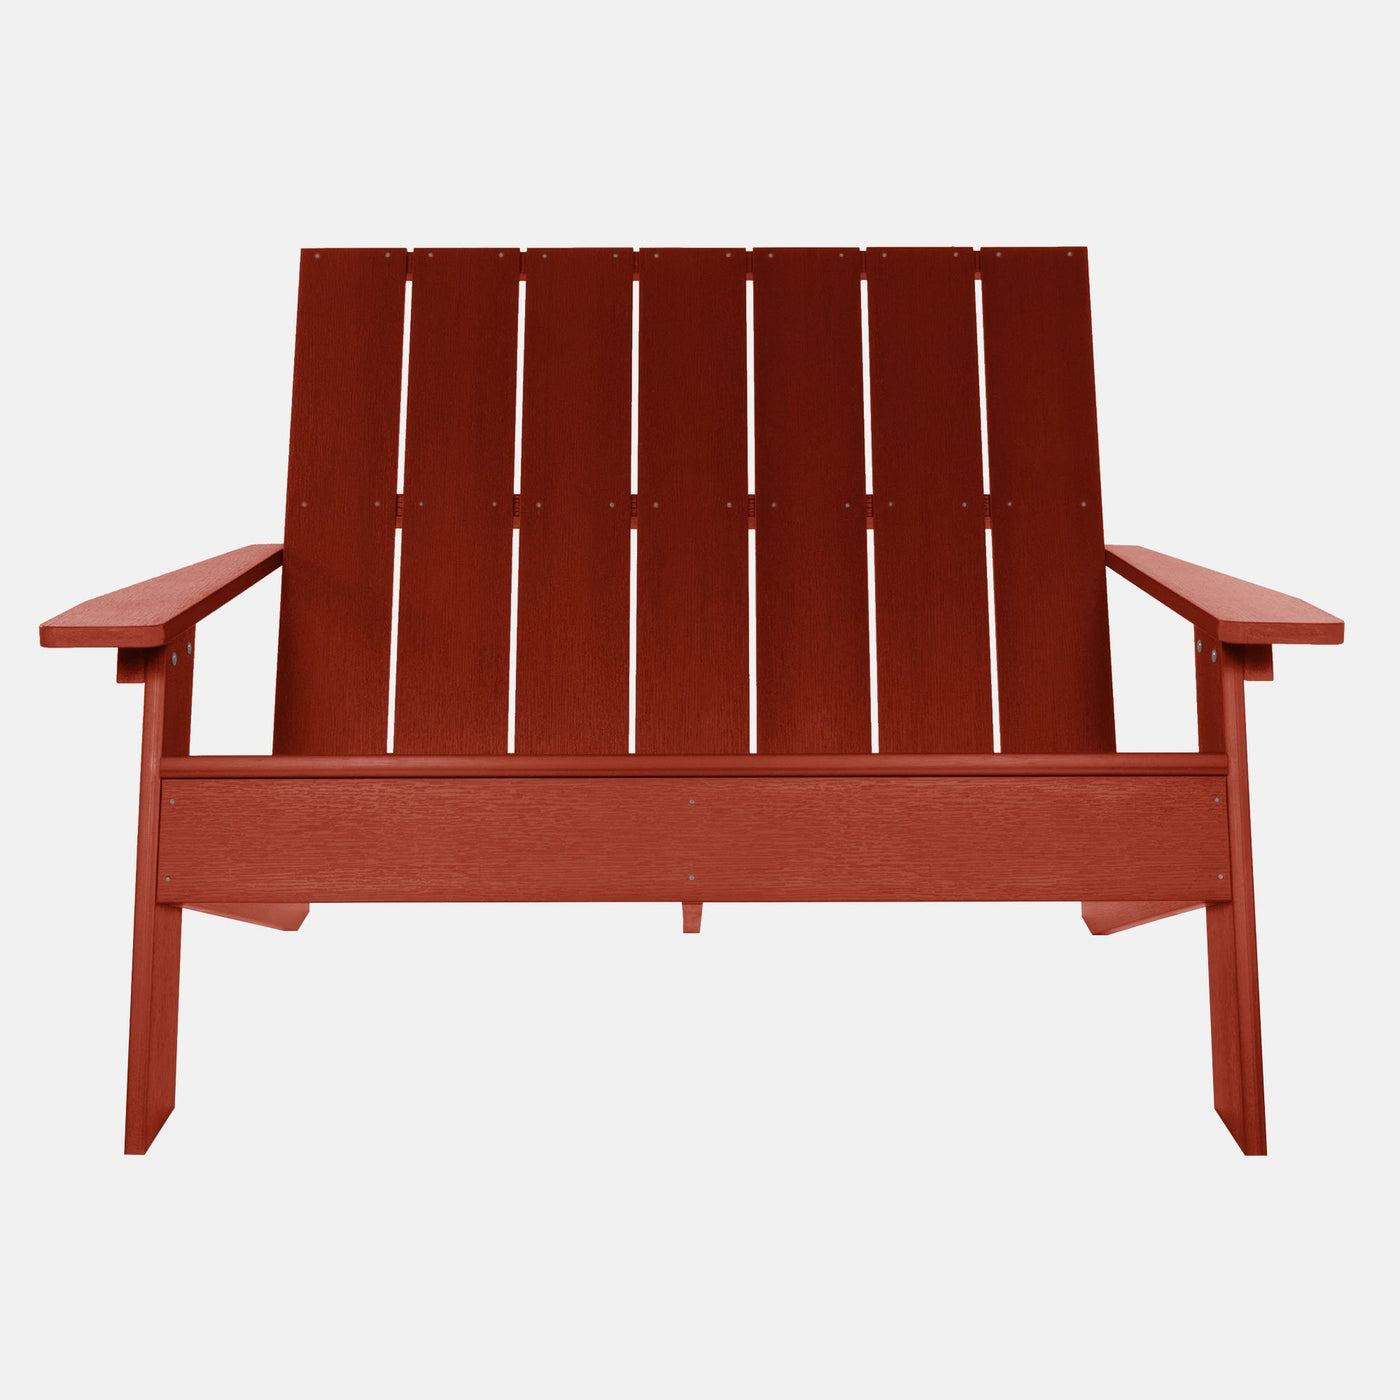 Front view of Italica Modern bench in Rustic Red